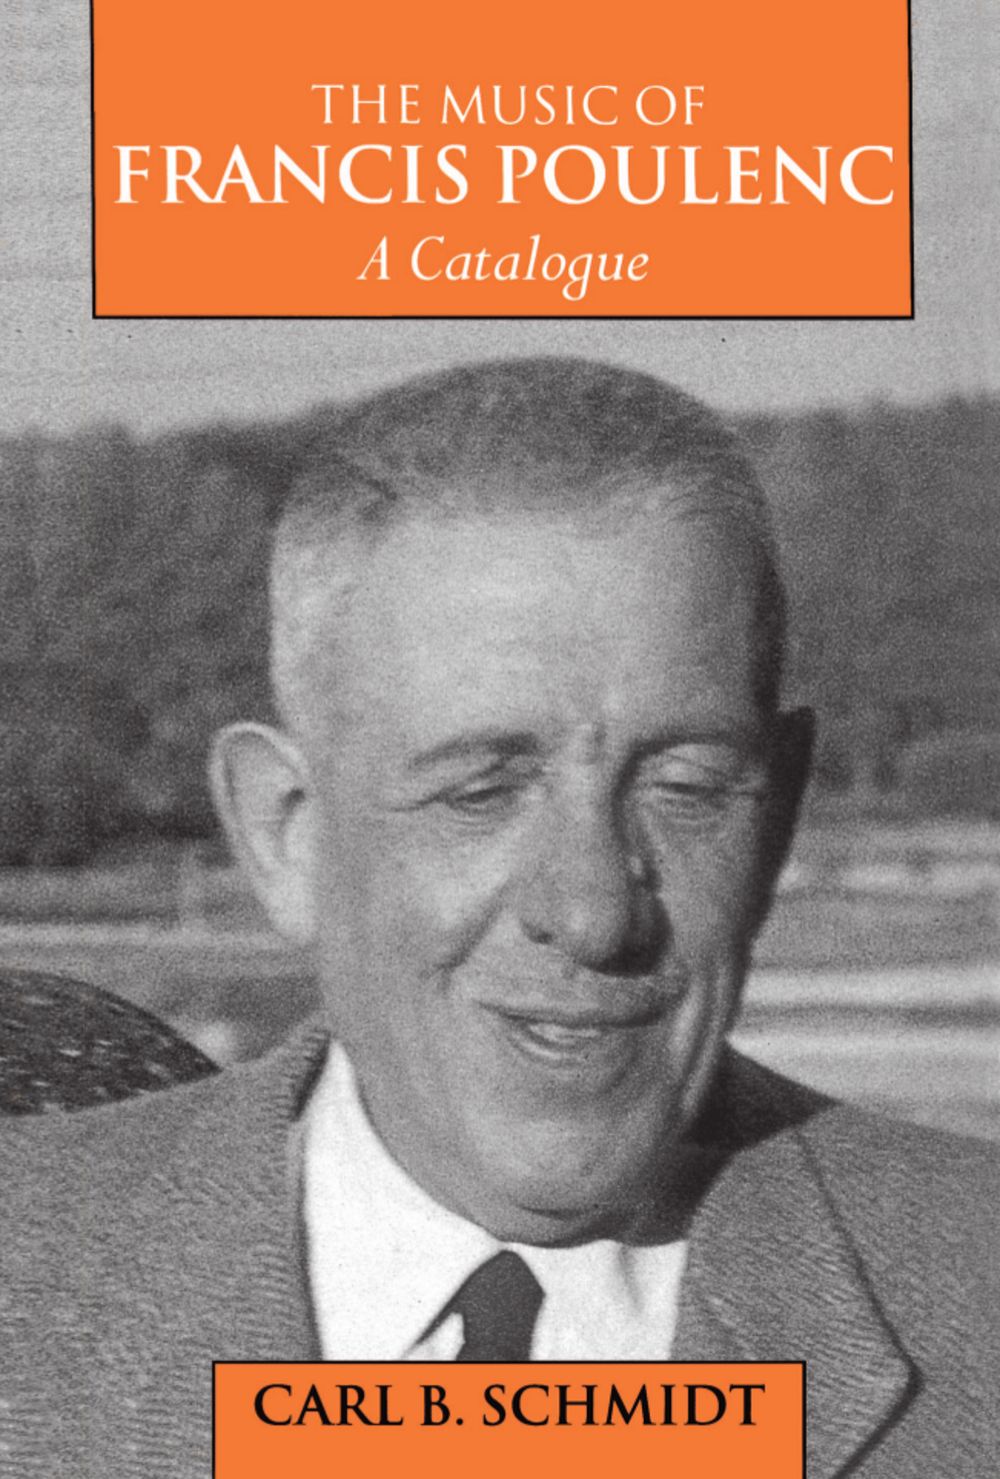 The Music of Francis Poulenc (1899-1963)